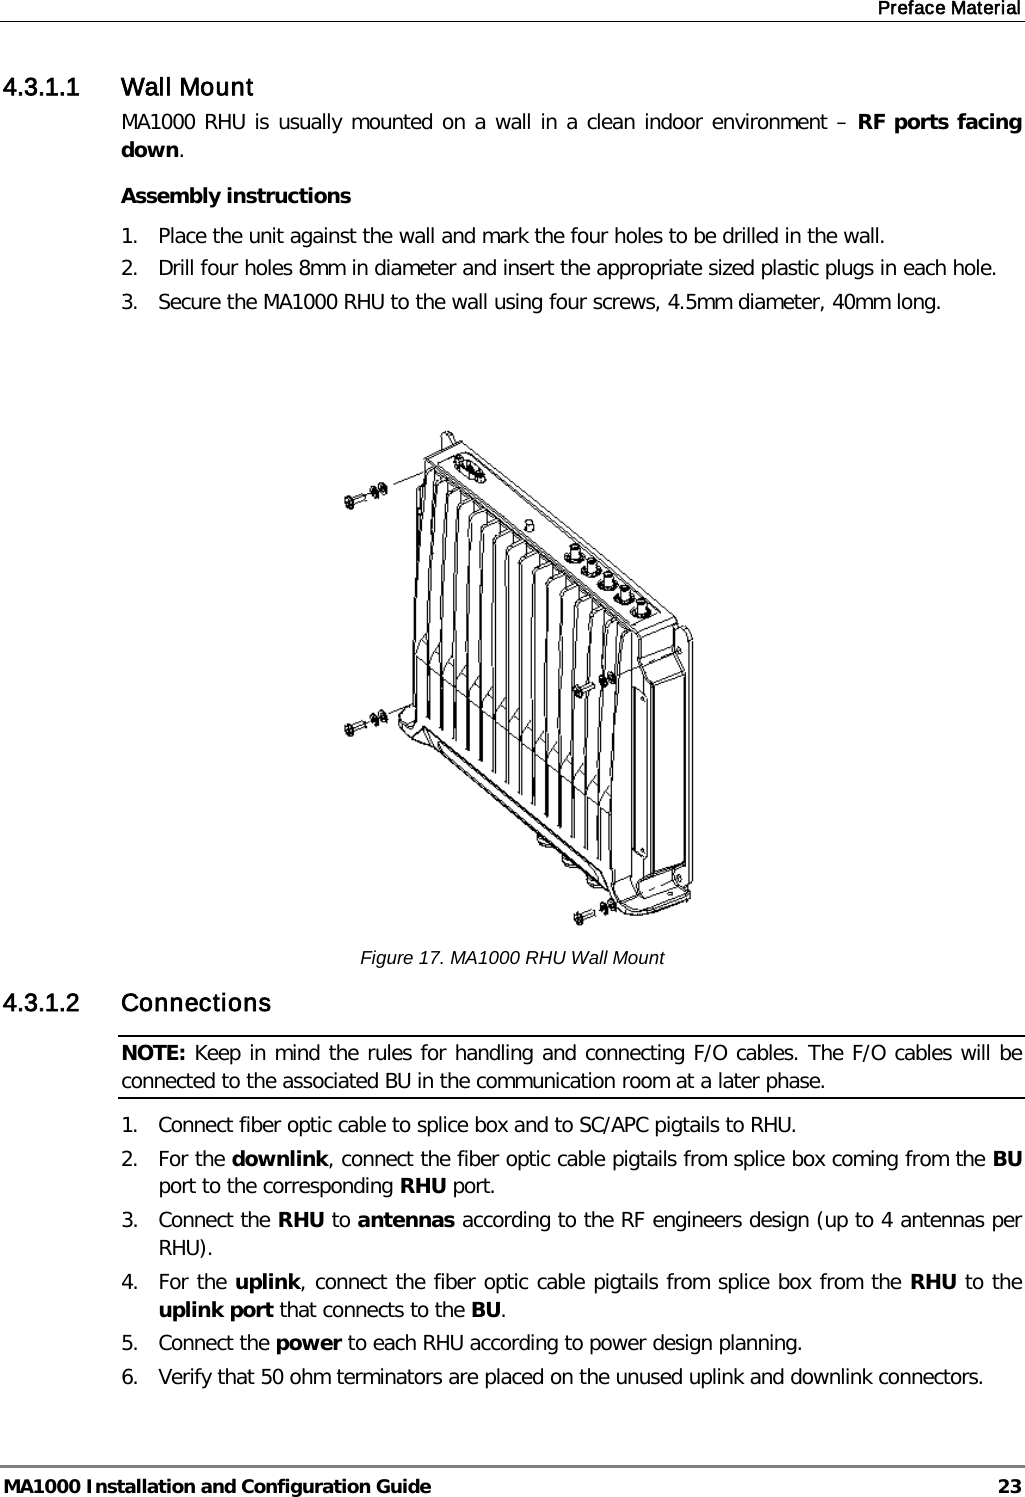 Preface Material  MA1000 Installation and Configuration Guide  23 4.3.1.1 Wall Mount MA1000 RHU is usually mounted on a wall in a clean indoor environment – RF ports facing down.  Assembly instructions 1.  Place the unit against the wall and mark the four holes to be drilled in the wall. 2.  Drill four holes 8mm in diameter and insert the appropriate sized plastic plugs in each hole. 3.  Secure the MA1000 RHU to the wall using four screws, 4.5mm diameter, 40mm long.     Figure 17. MA1000 RHU Wall Mount 4.3.1.2 Connections NOTE: Keep in mind the rules for handling and connecting F/O cables. The F/O cables will be connected to the associated BU in the communication room at a later phase.  1.  Connect fiber optic cable to splice box and to SC/APC pigtails to RHU. 2.  For the downlink, connect the fiber optic cable pigtails from splice box coming from the BU port to the corresponding RHU port. 3.  Connect the RHU to antennas according to the RF engineers design (up to 4 antennas per RHU). 4.  For the uplink, connect the fiber optic cable pigtails from splice box from the RHU to the uplink port that connects to the BU. 5.  Connect the power to each RHU according to power design planning. 6.  Verify that 50 ohm terminators are placed on the unused uplink and downlink connectors.   